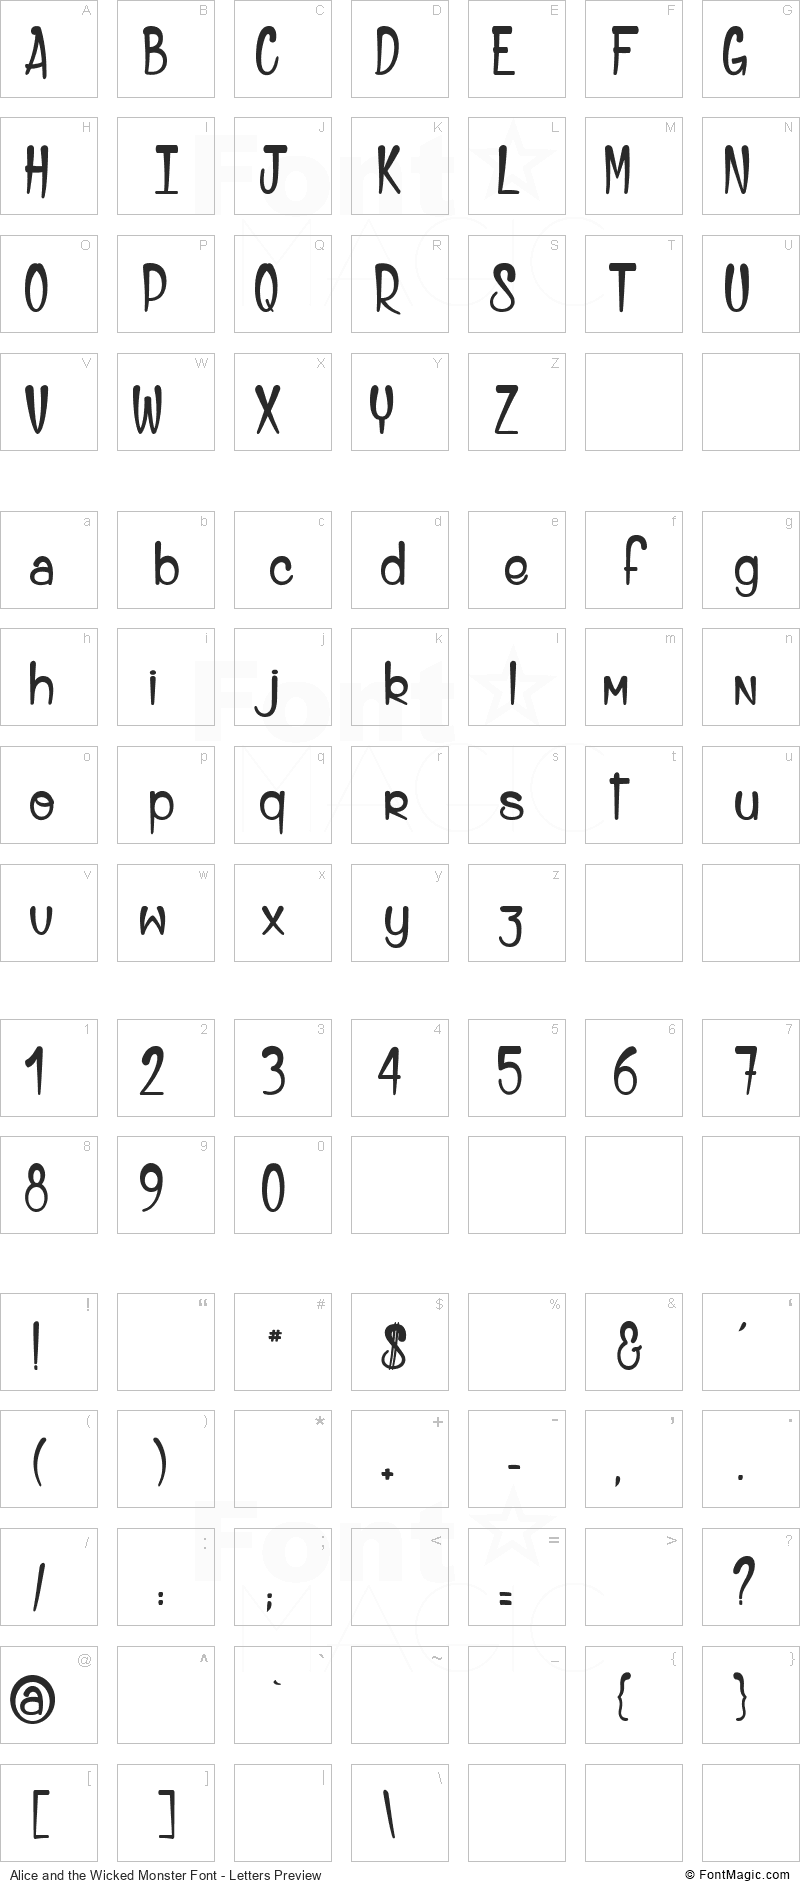 Alice and the Wicked Monster Font - All Latters Preview Chart